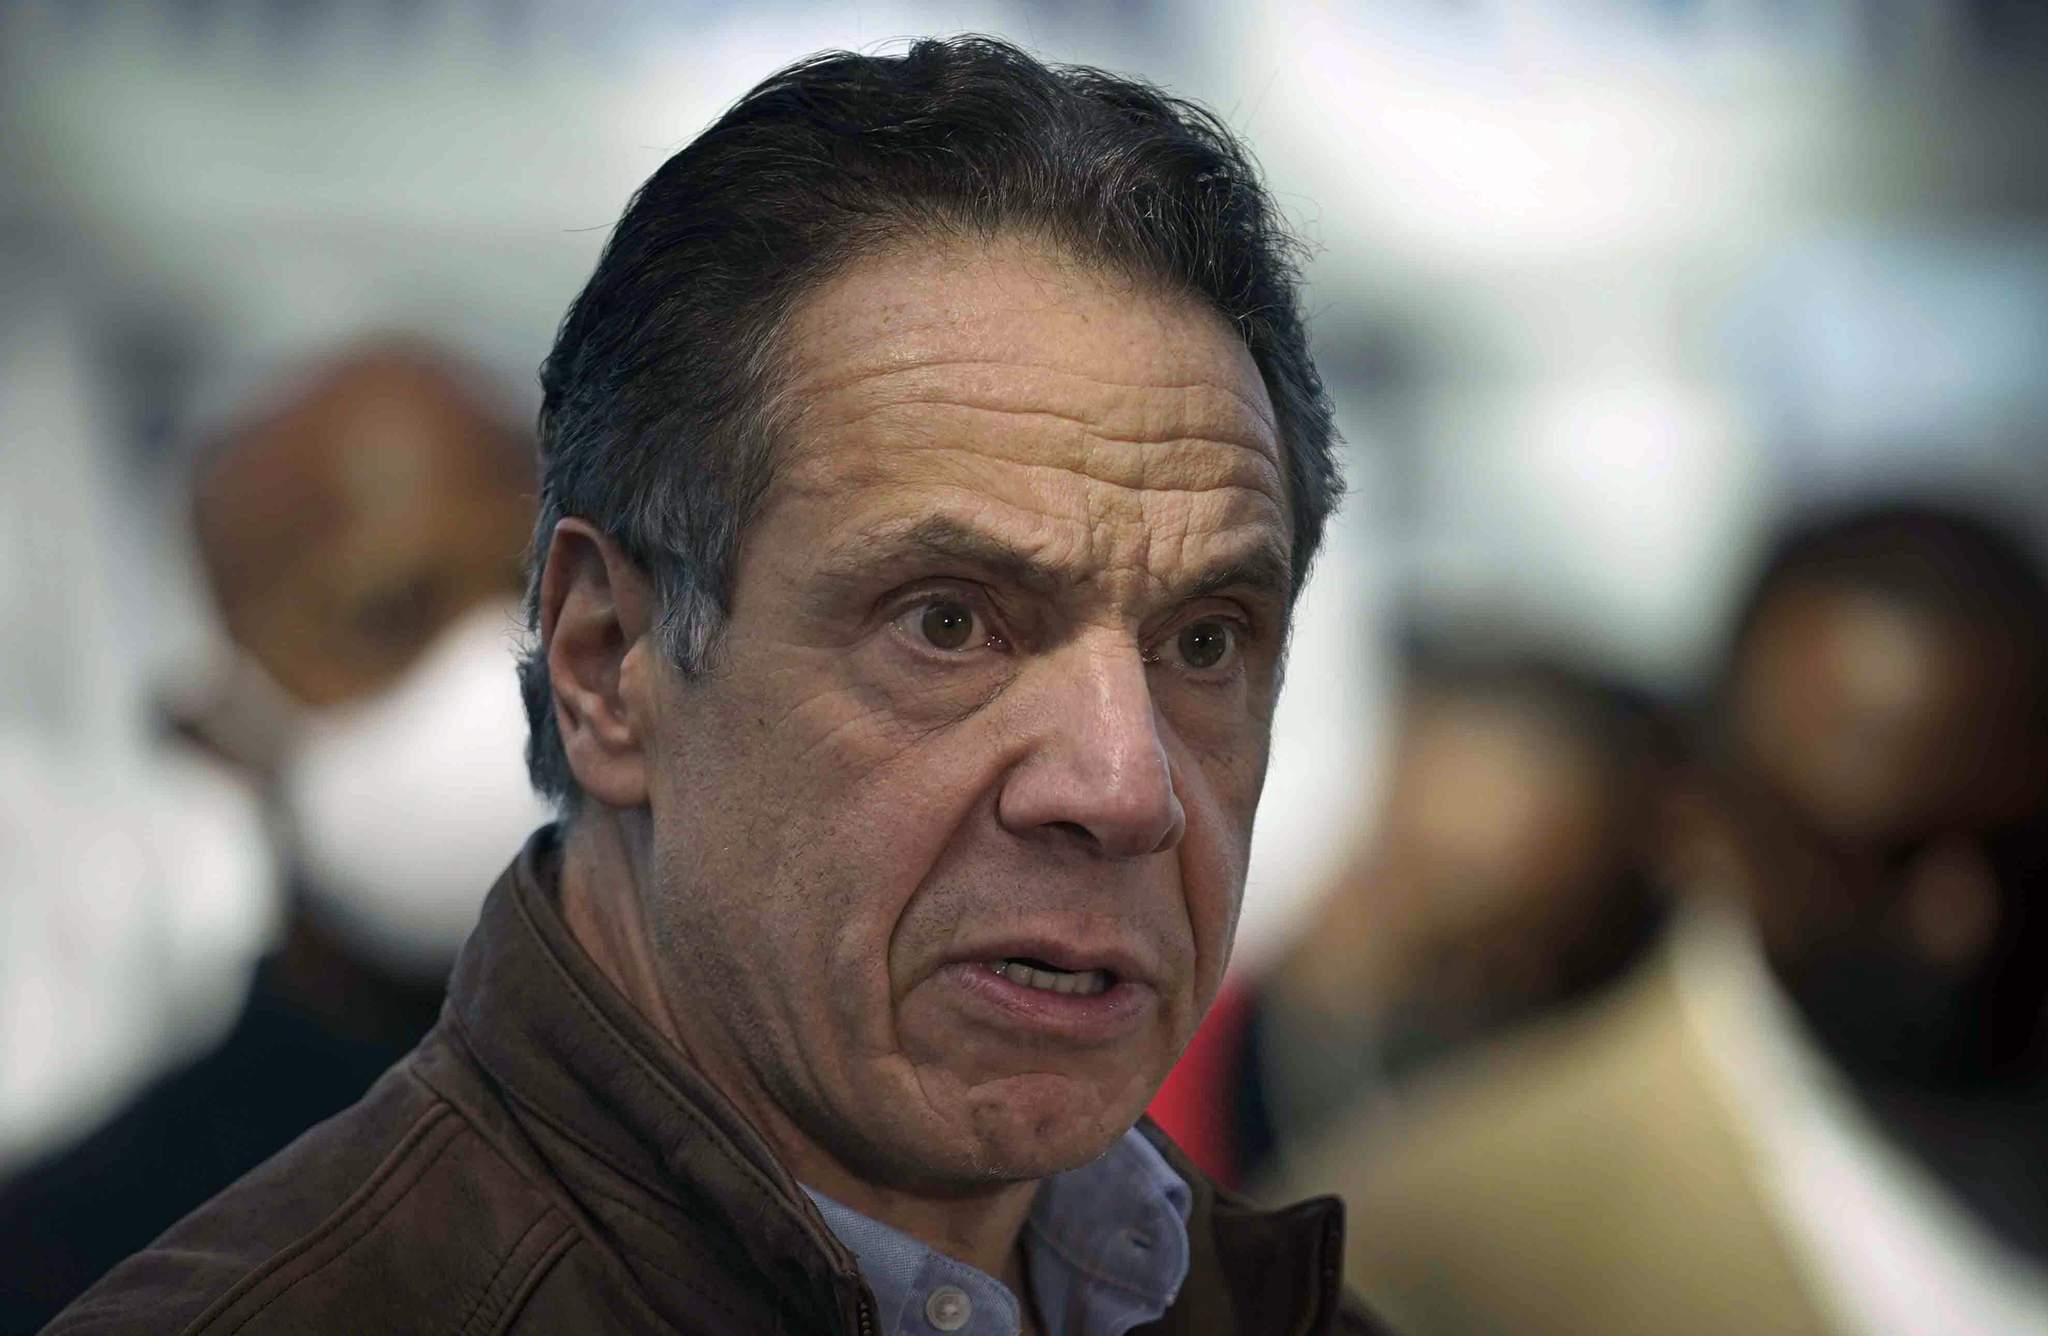 A look at Cuomo aides’ sexual harassment allegations